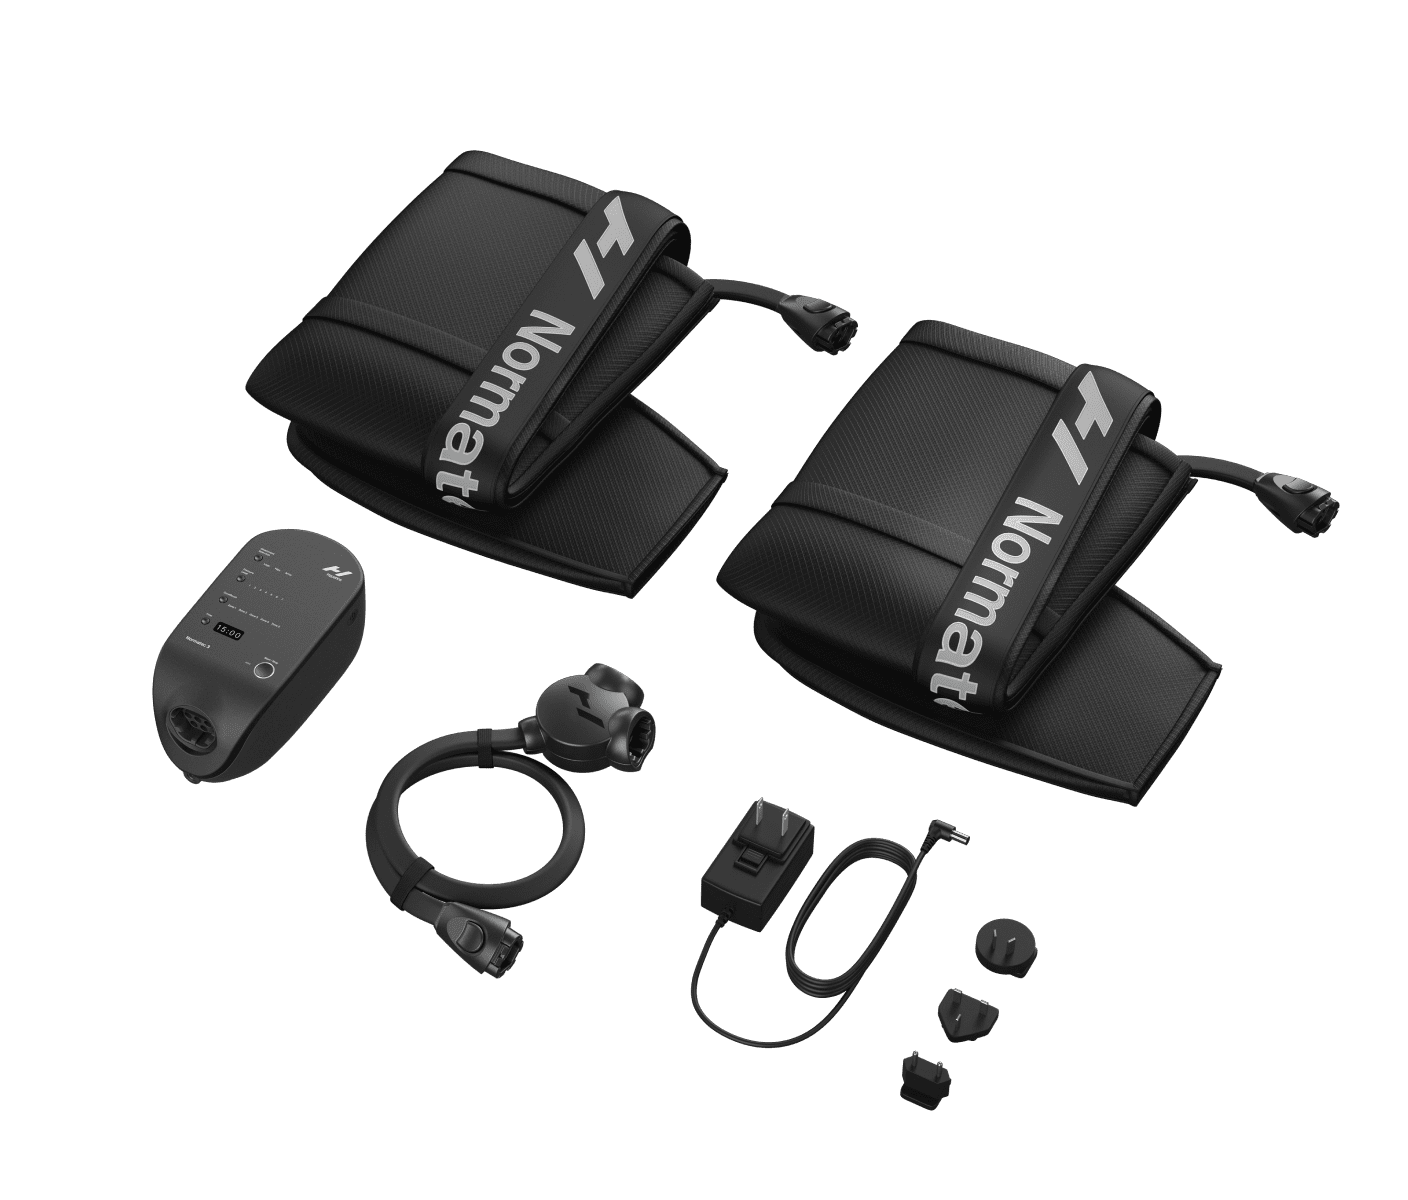 What’s included with your Normatec 3 Legs